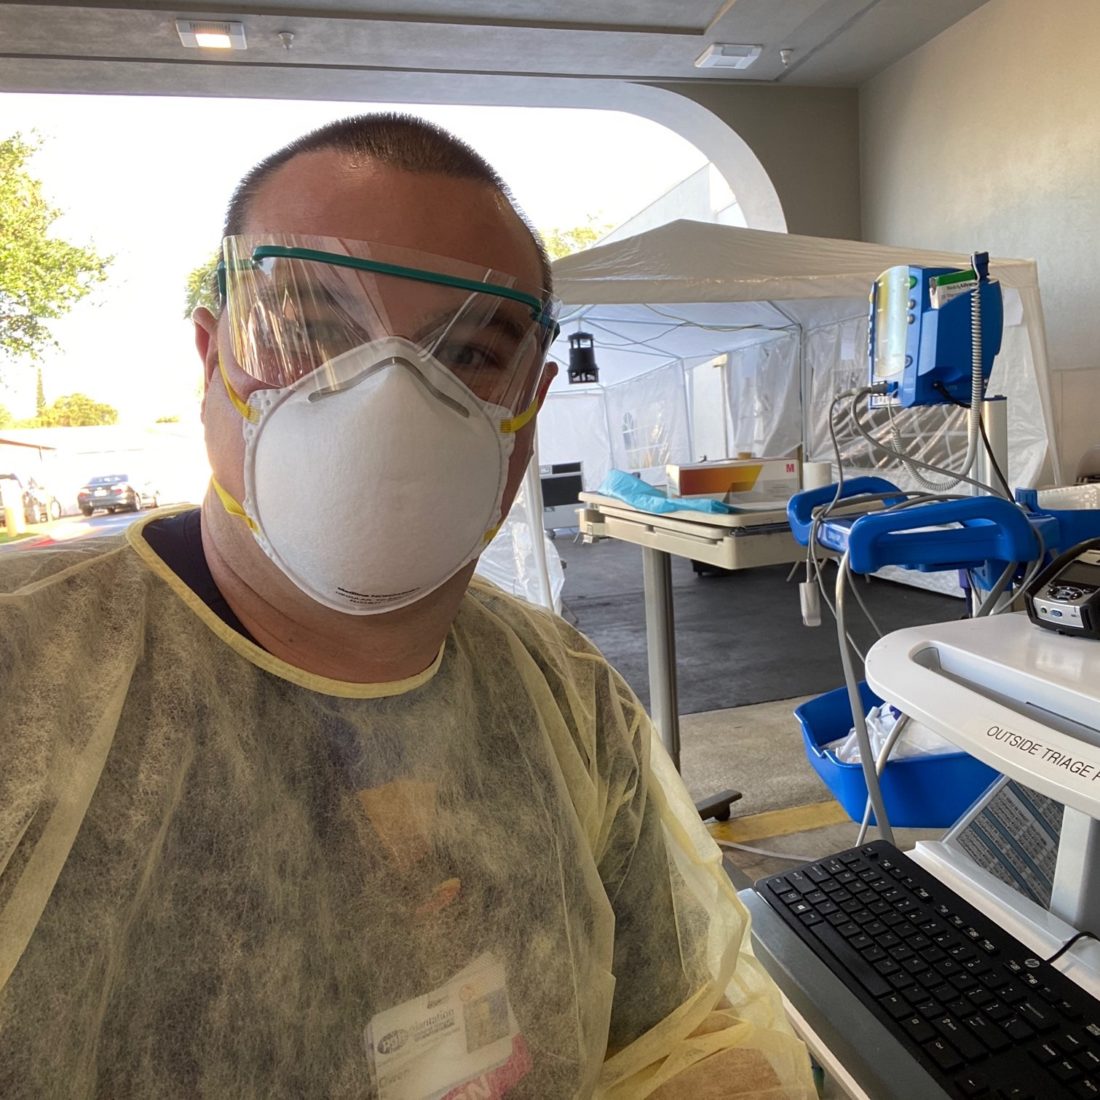 Nurse Owen Rogers wearing protective goggles, mask, and clothing cover over his scrubs, sitting next to medical equipment